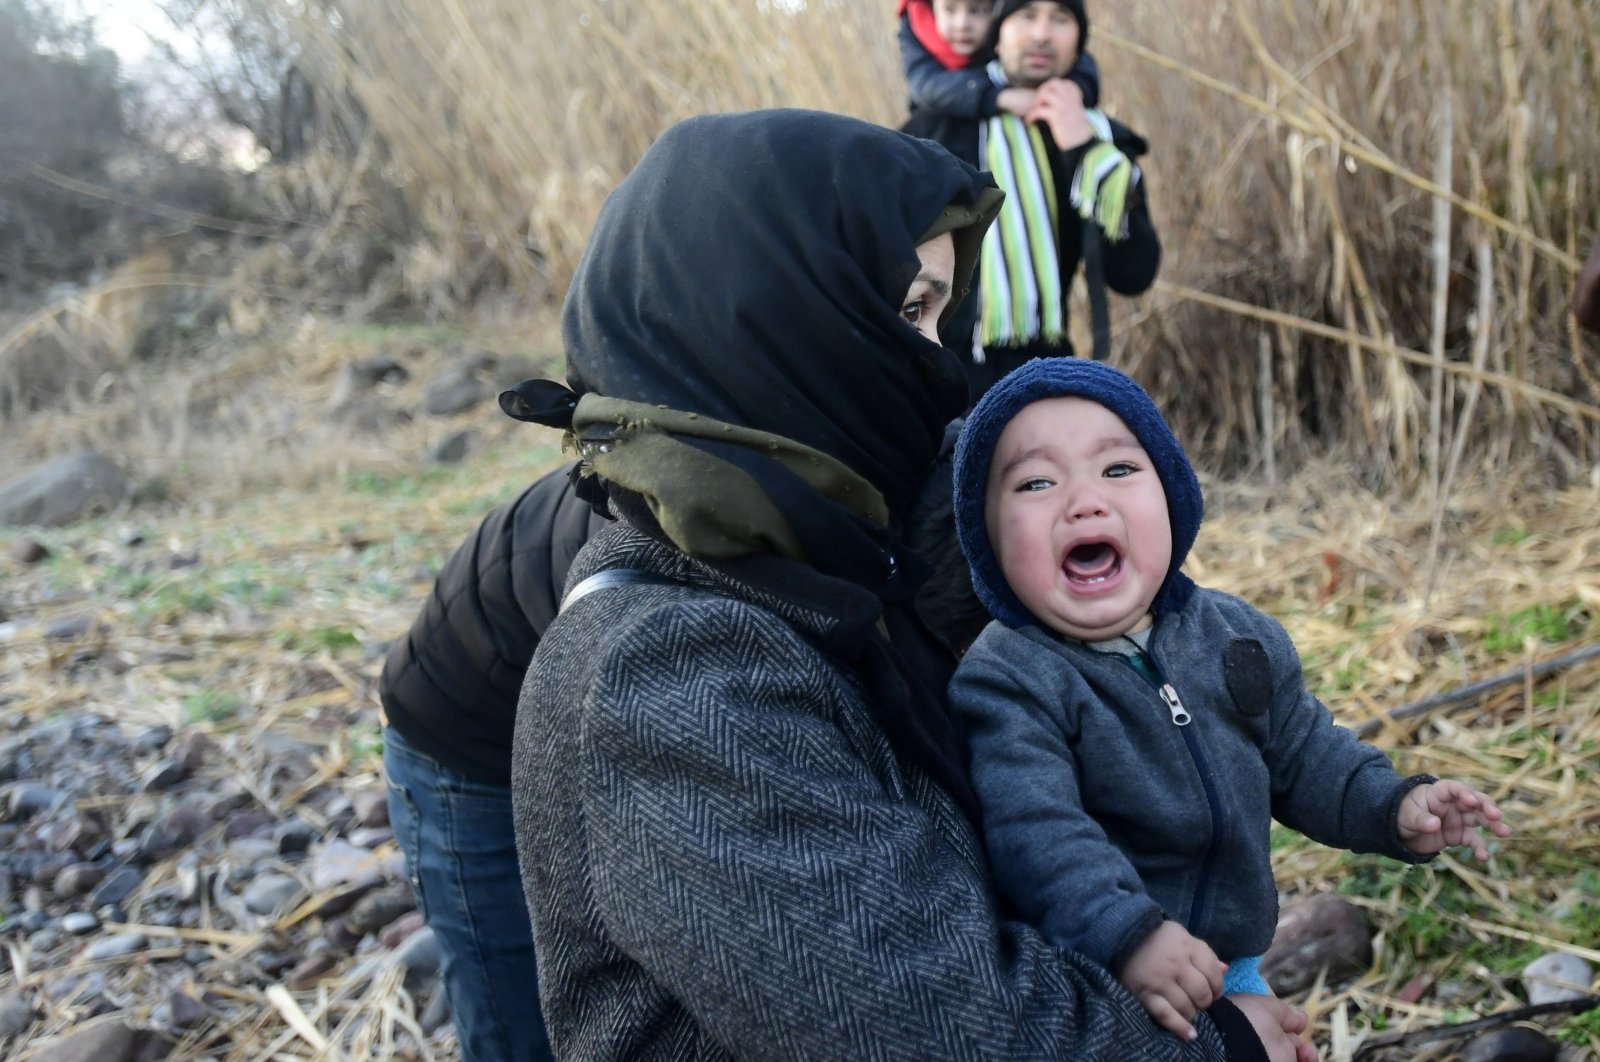 A baby cries as migrants arrive at the village of Skala Sikaminias, on the Greek island of Lesbos, after crossing on a dinghy the Aegean sea from Turkey, March 2, 2020. (AP Photo)